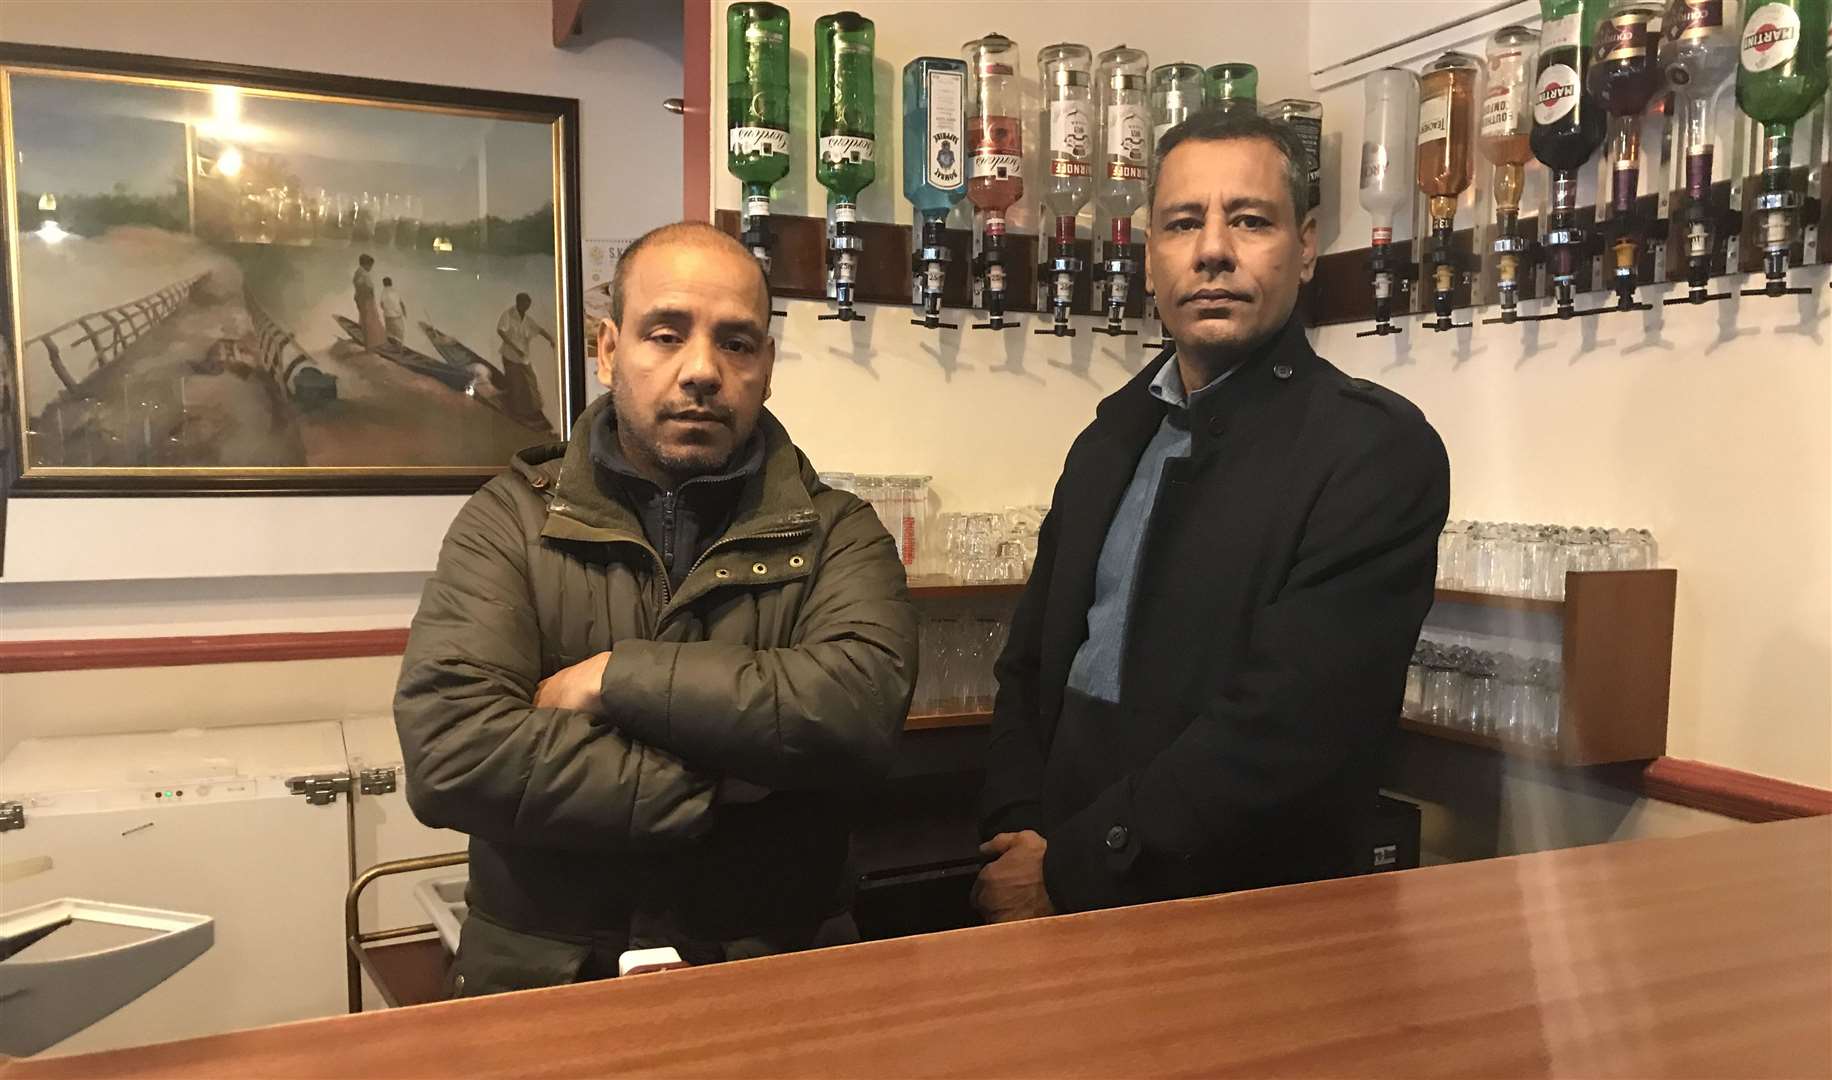 It's been a difficult month for Shiper Karim (right) owns Tandoor Mahal along with his brother Shalim. Both men have apologised after their restaurant was temporarily shut down by health officials. (30763888)